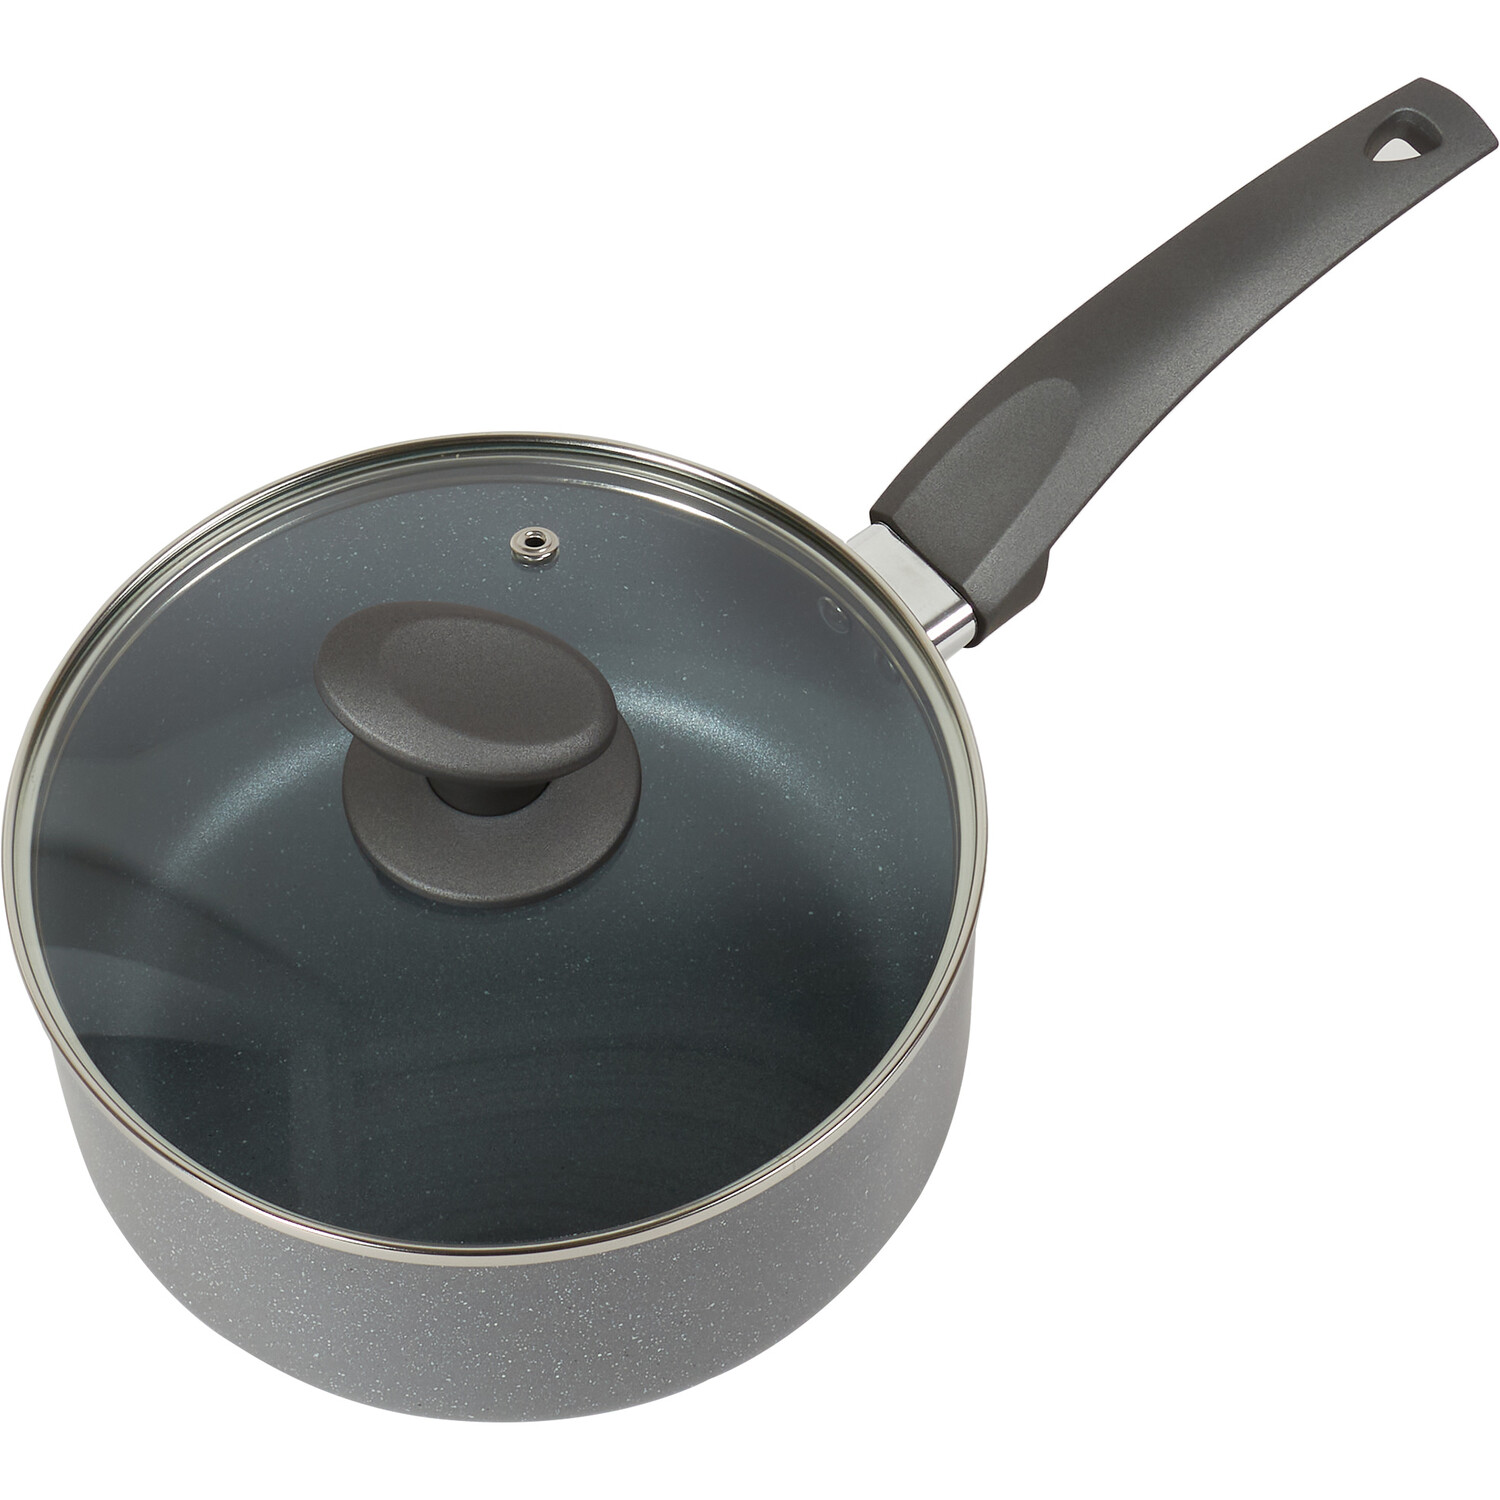 Marble Finish Saucepan with Lid - Black / Large Image 4